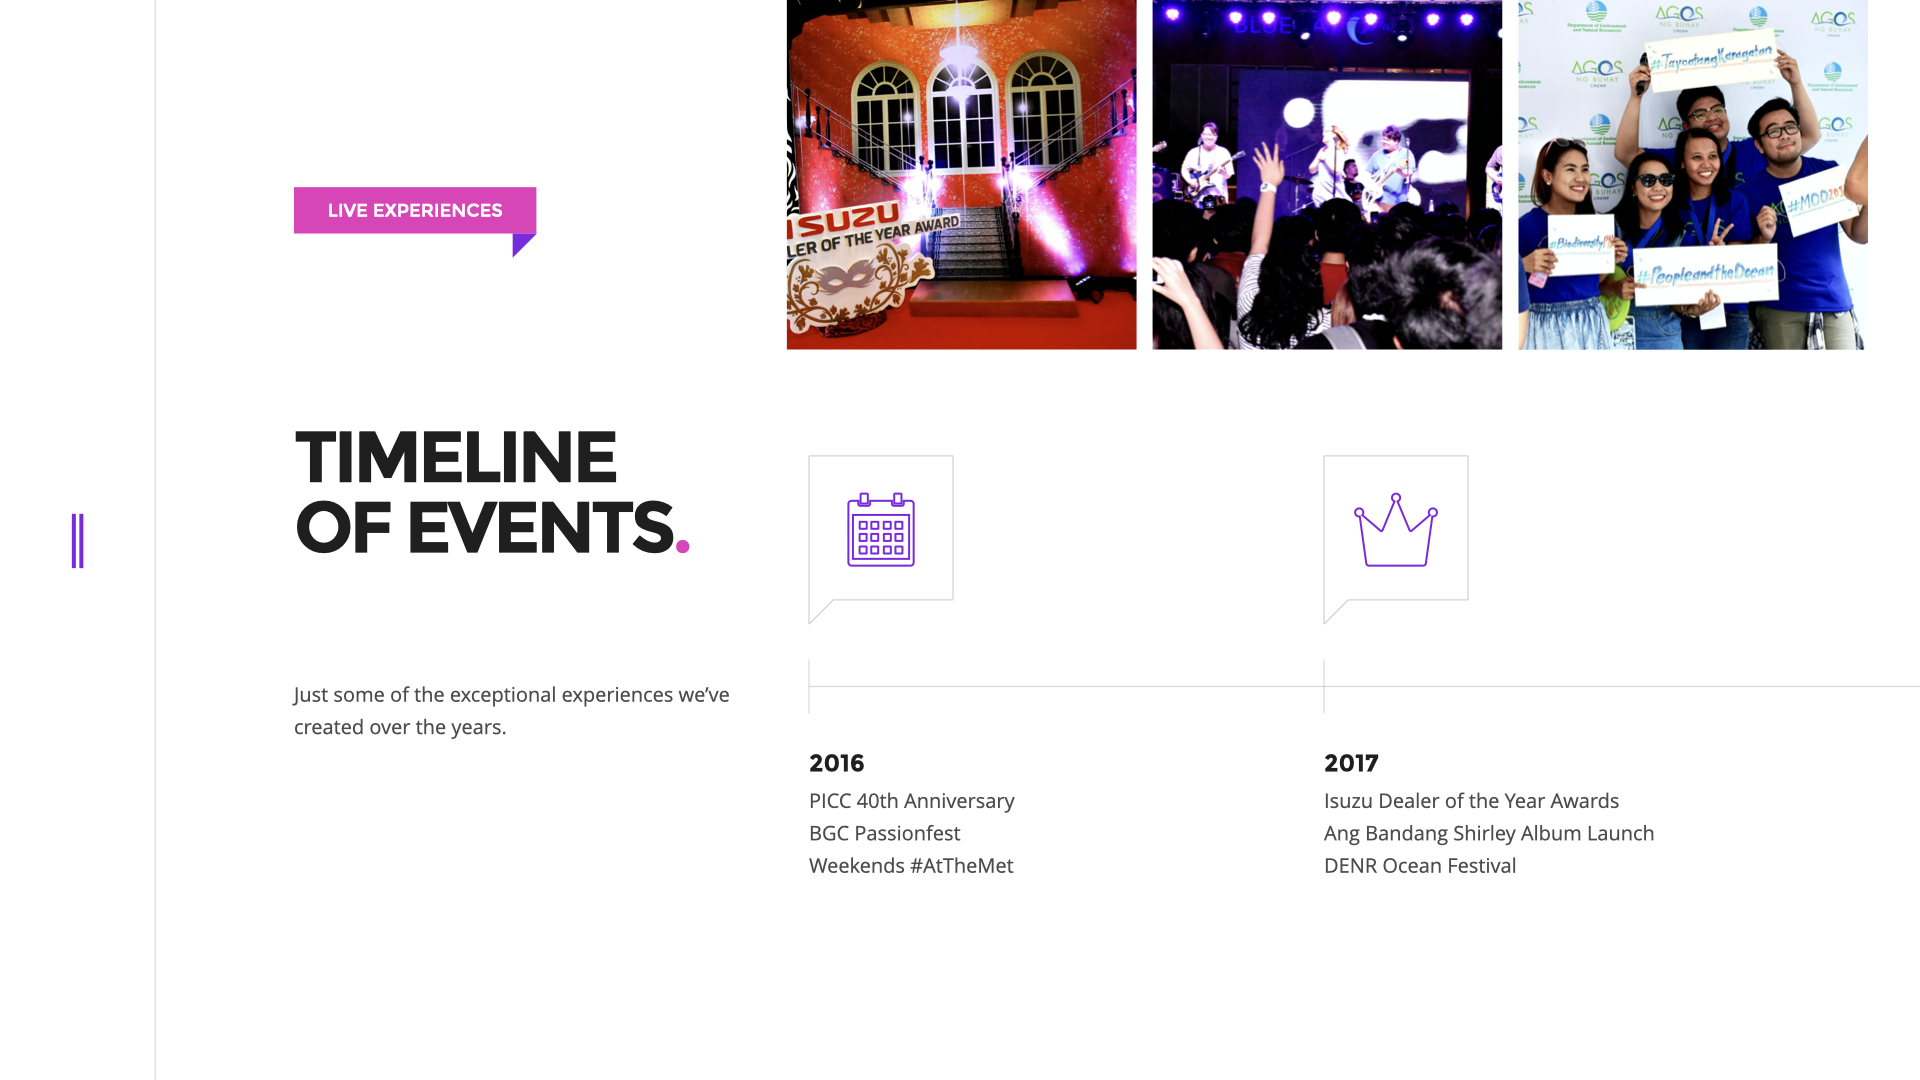 Live Experiences - Timeline of Events